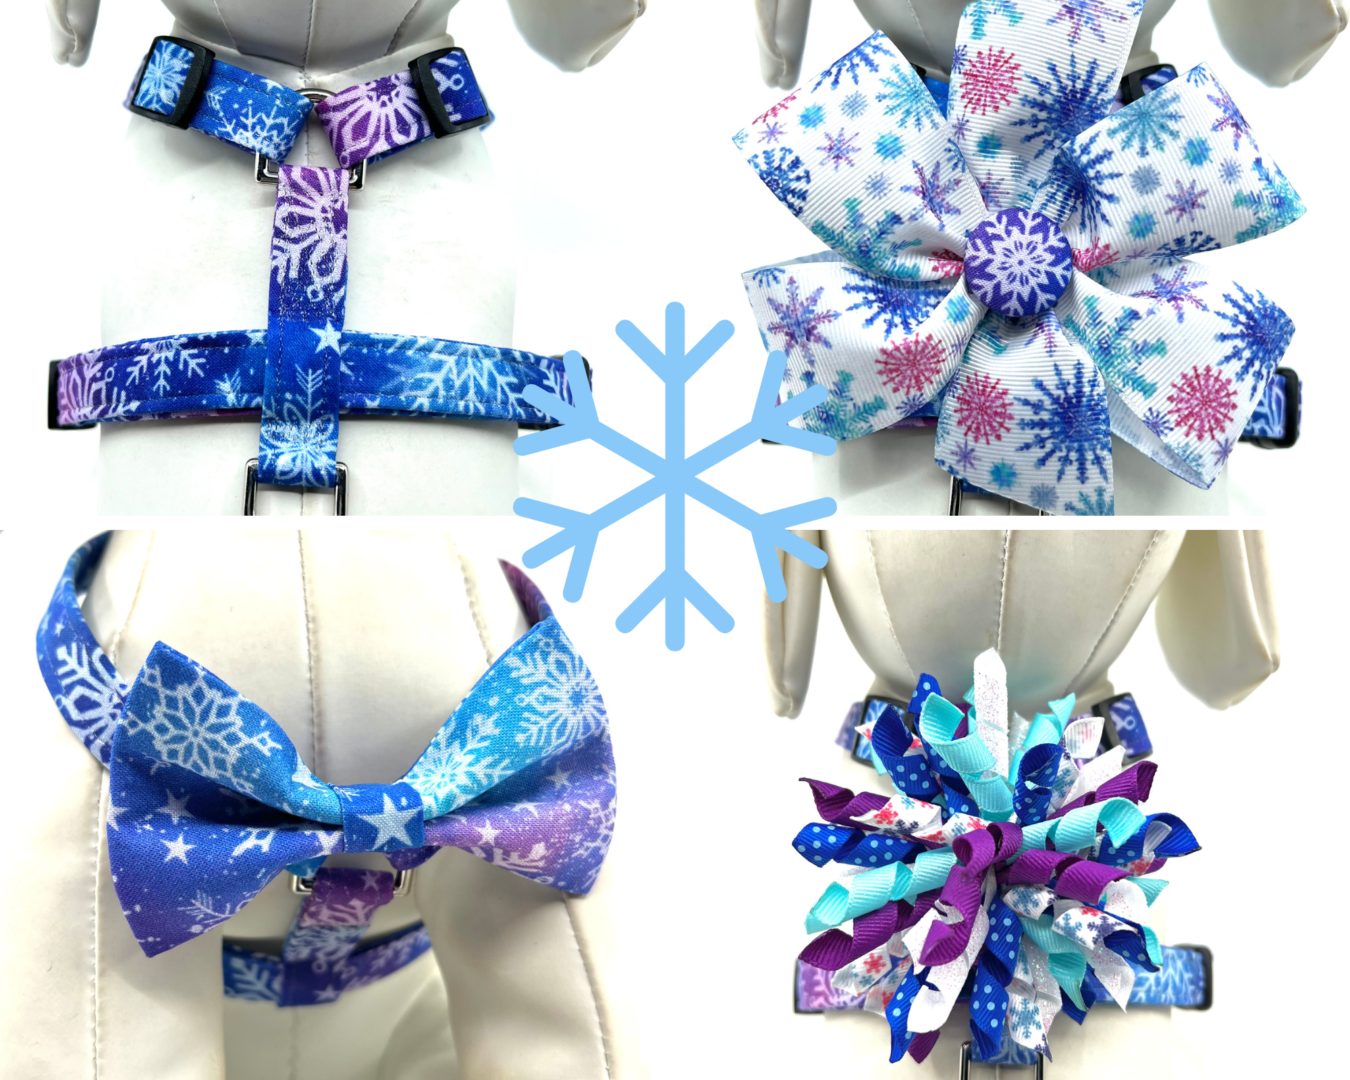 Snowflake dog harnesses and bows.